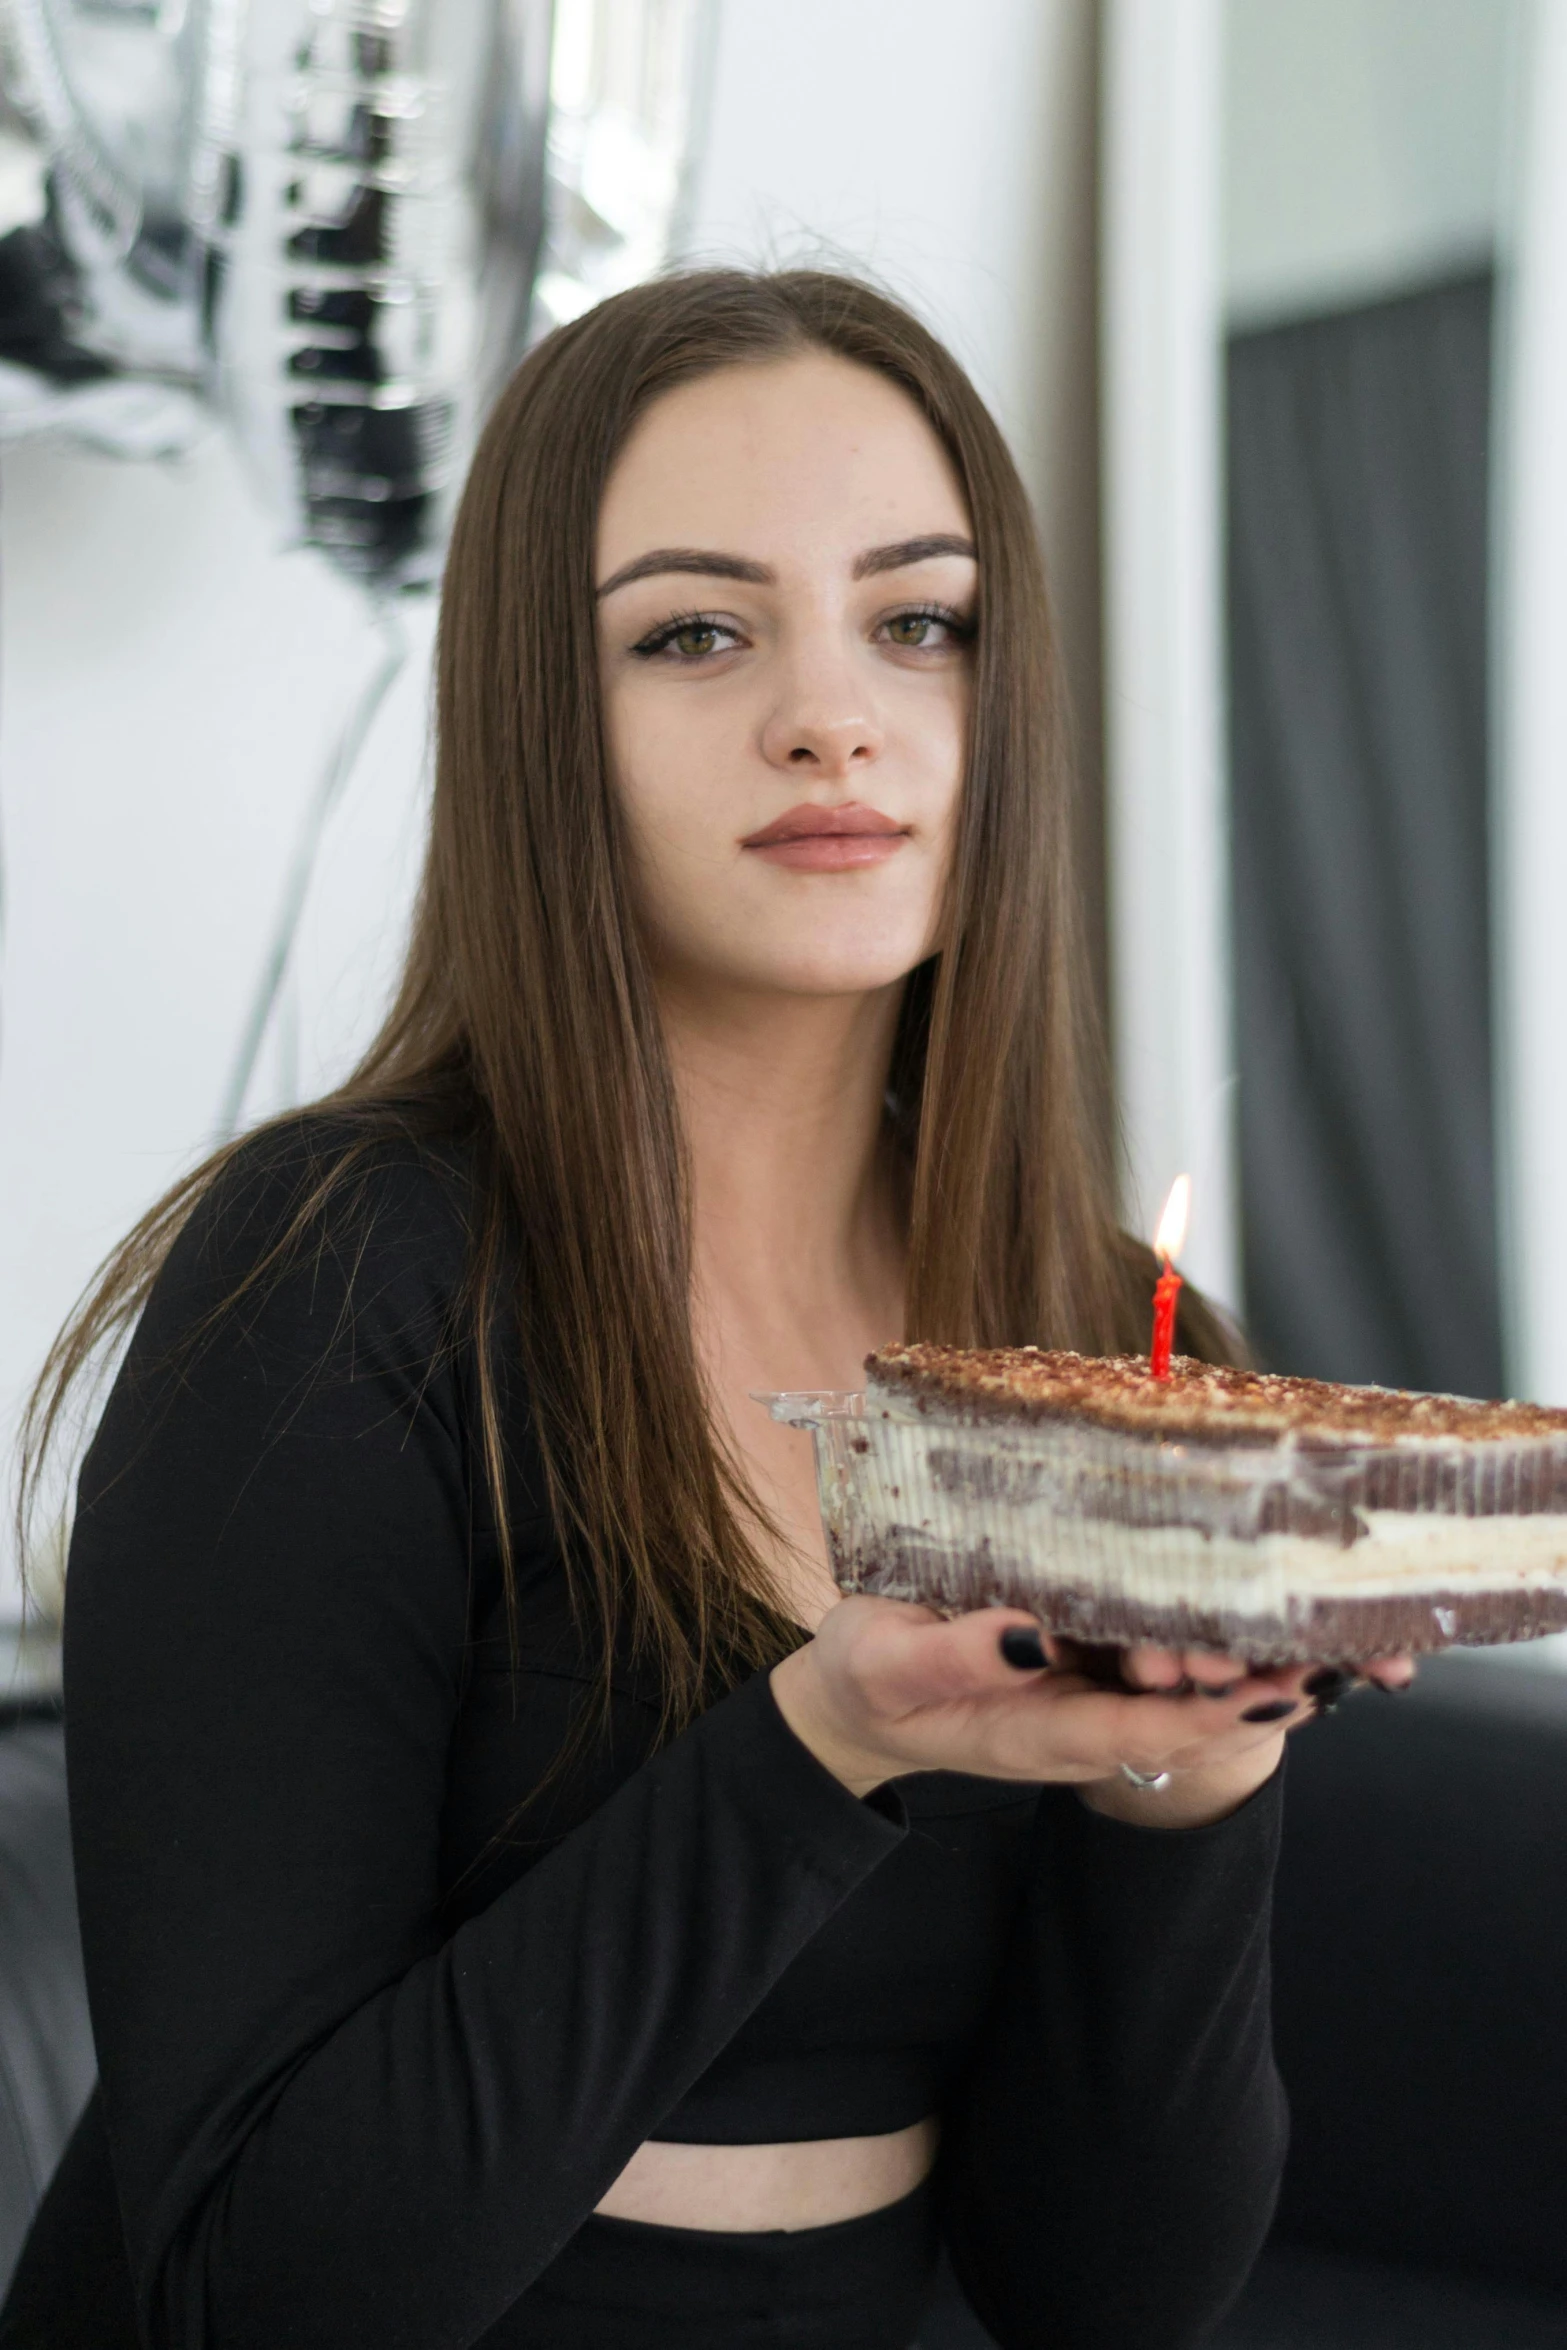 a woman holding a chocolate cake with a lit candle